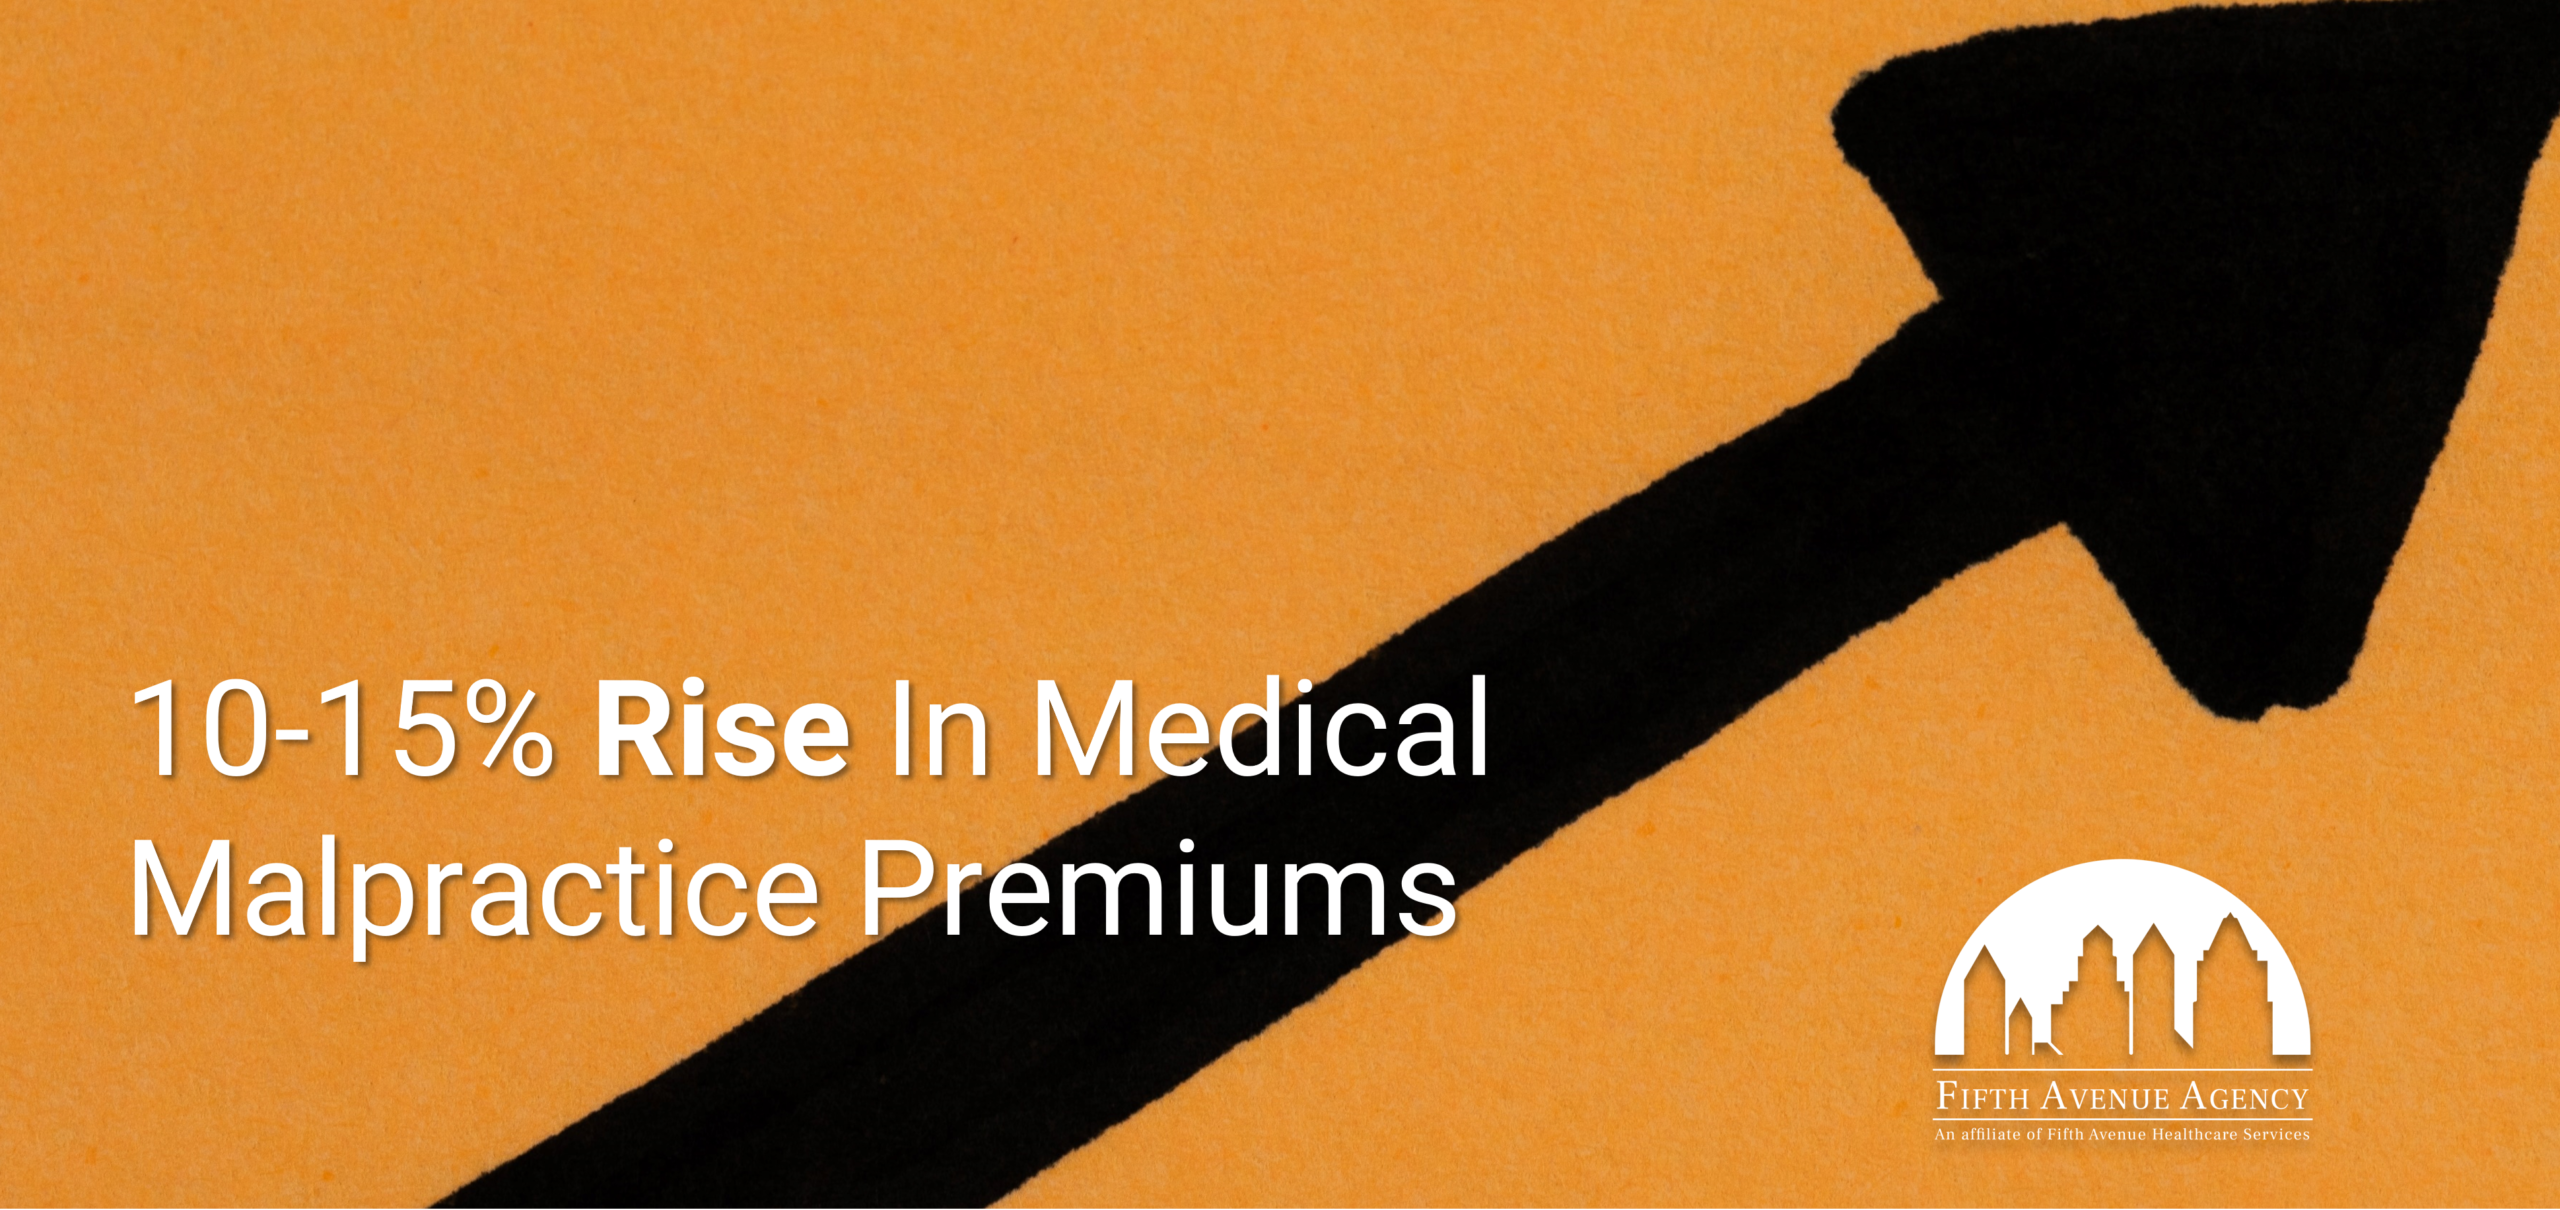 Rise in Medical Malpractice Premiums